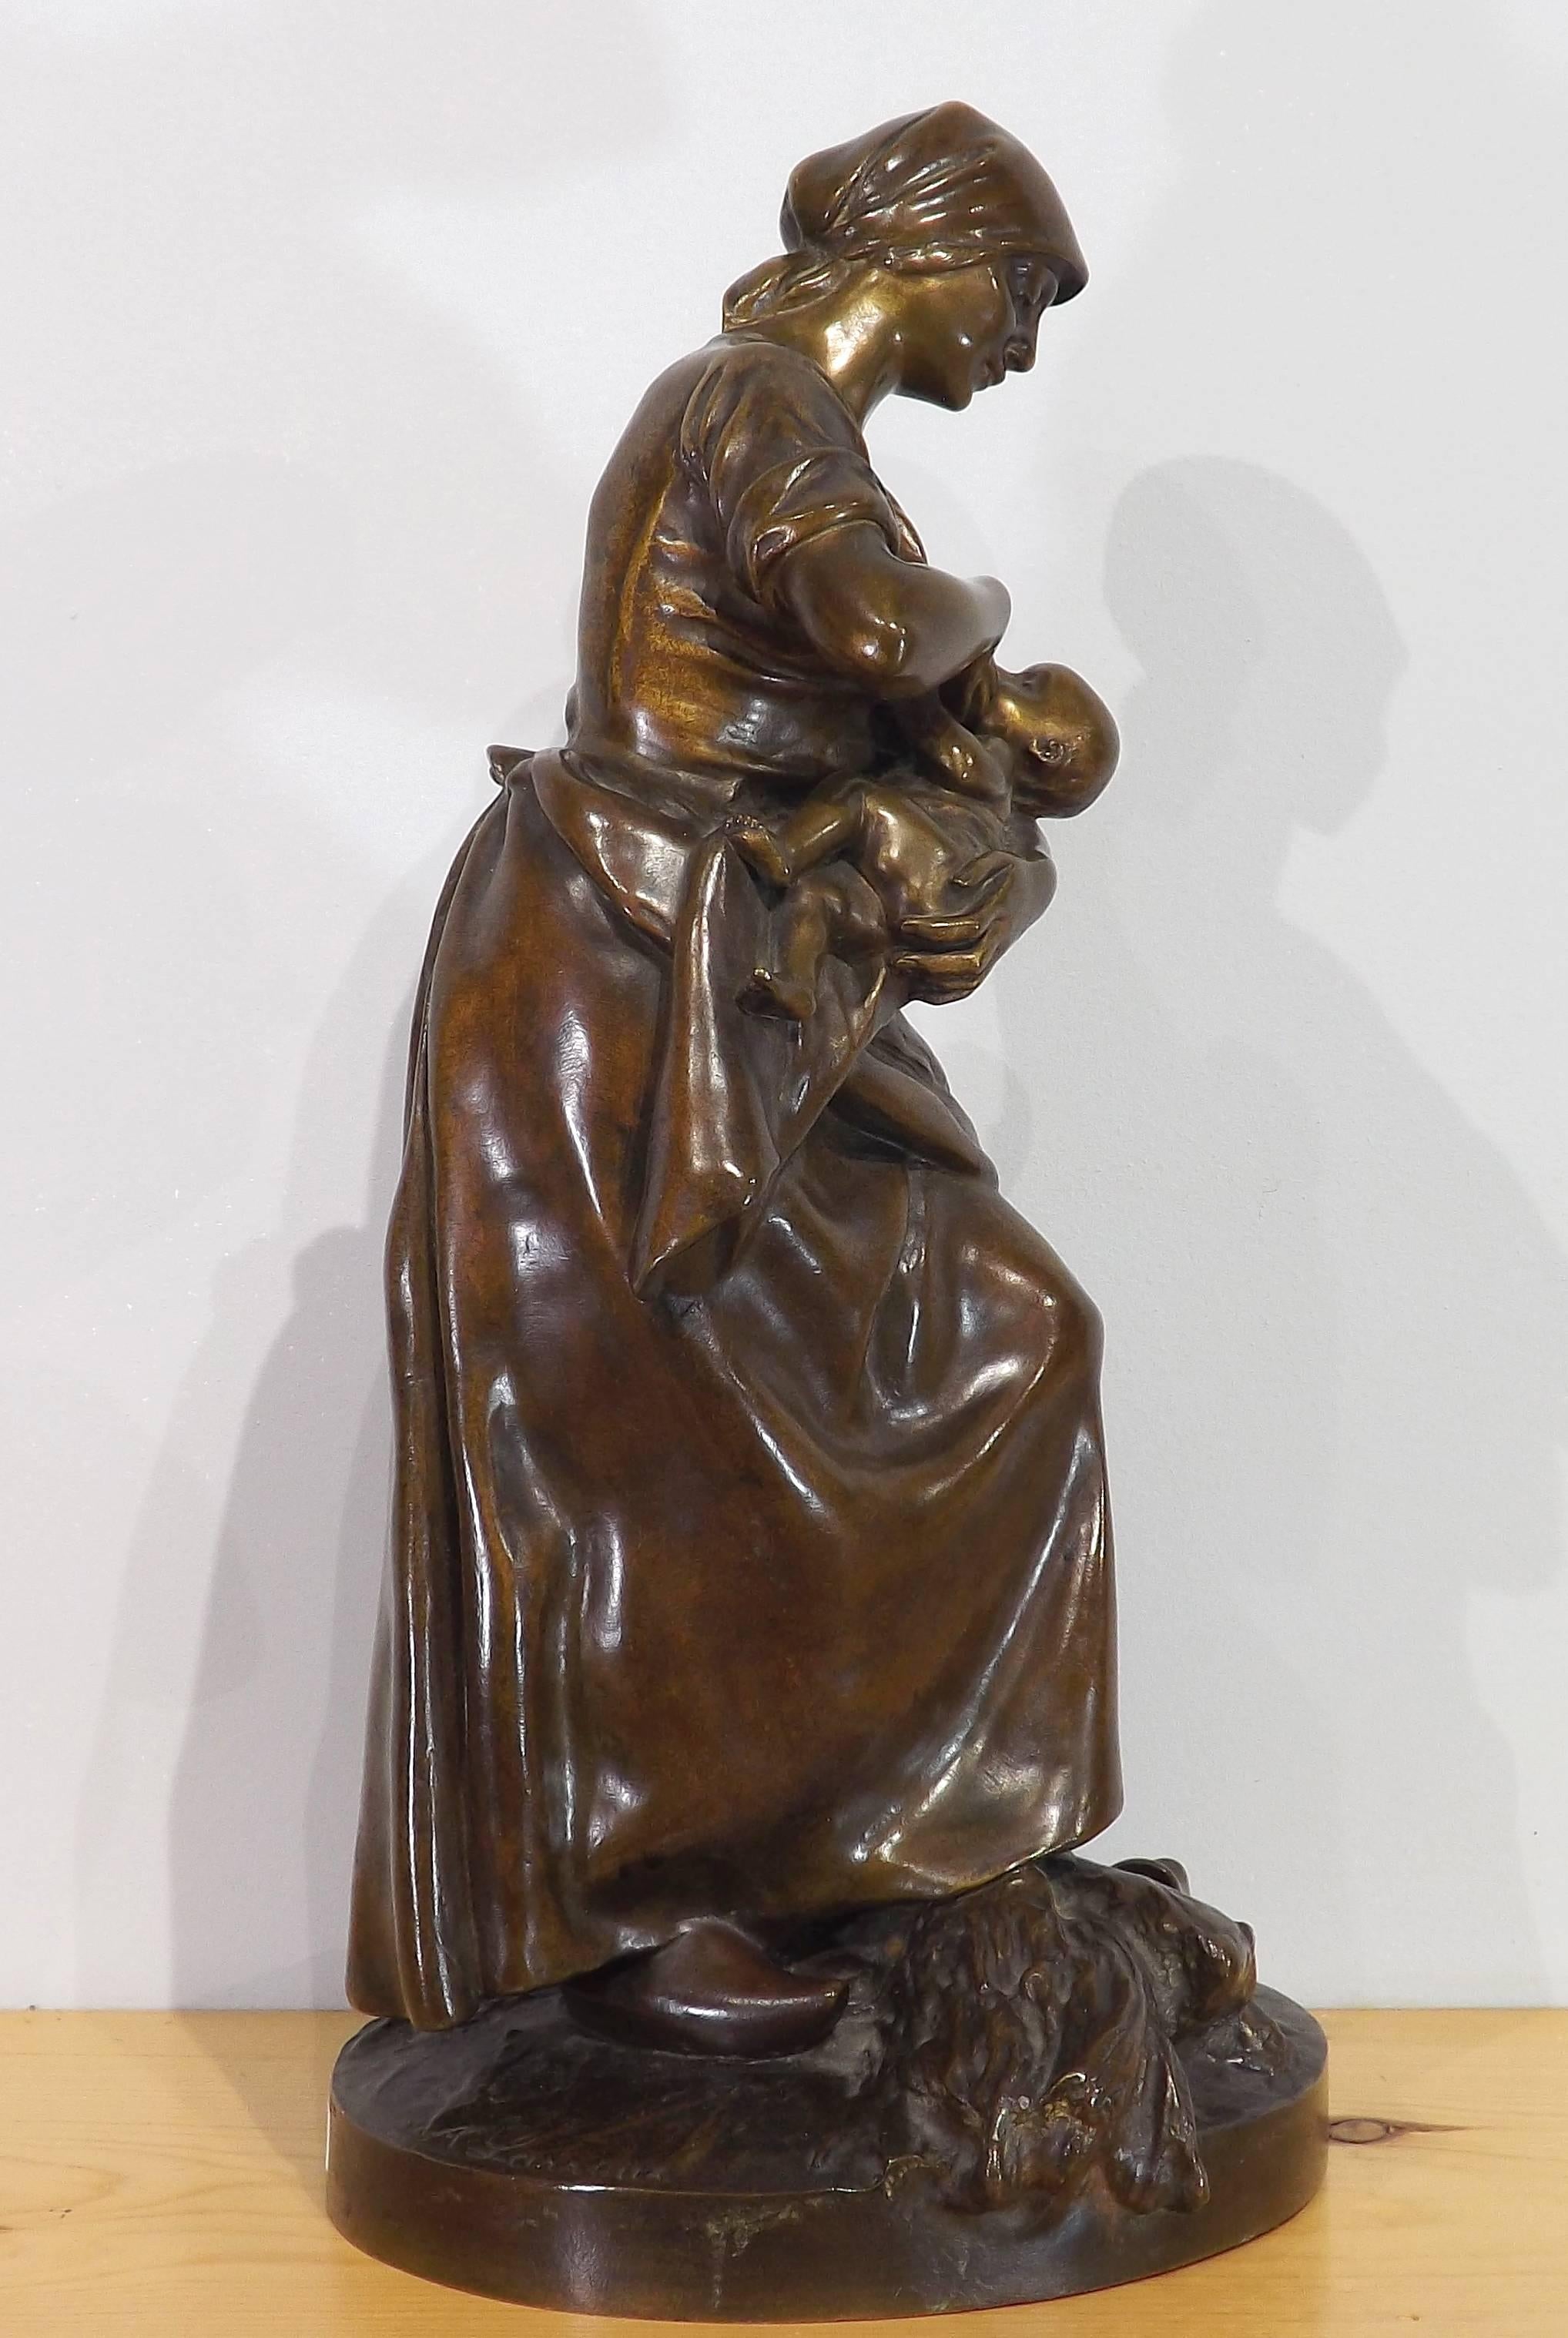 Original bronze of a French peasant woman nursing a newborn, standing over a sheaf of wheat. 

Antonin Larroux (1859 - 1913) was a member of the Salon des Artiste Francais and was known for his sculptures of the French working class.

He